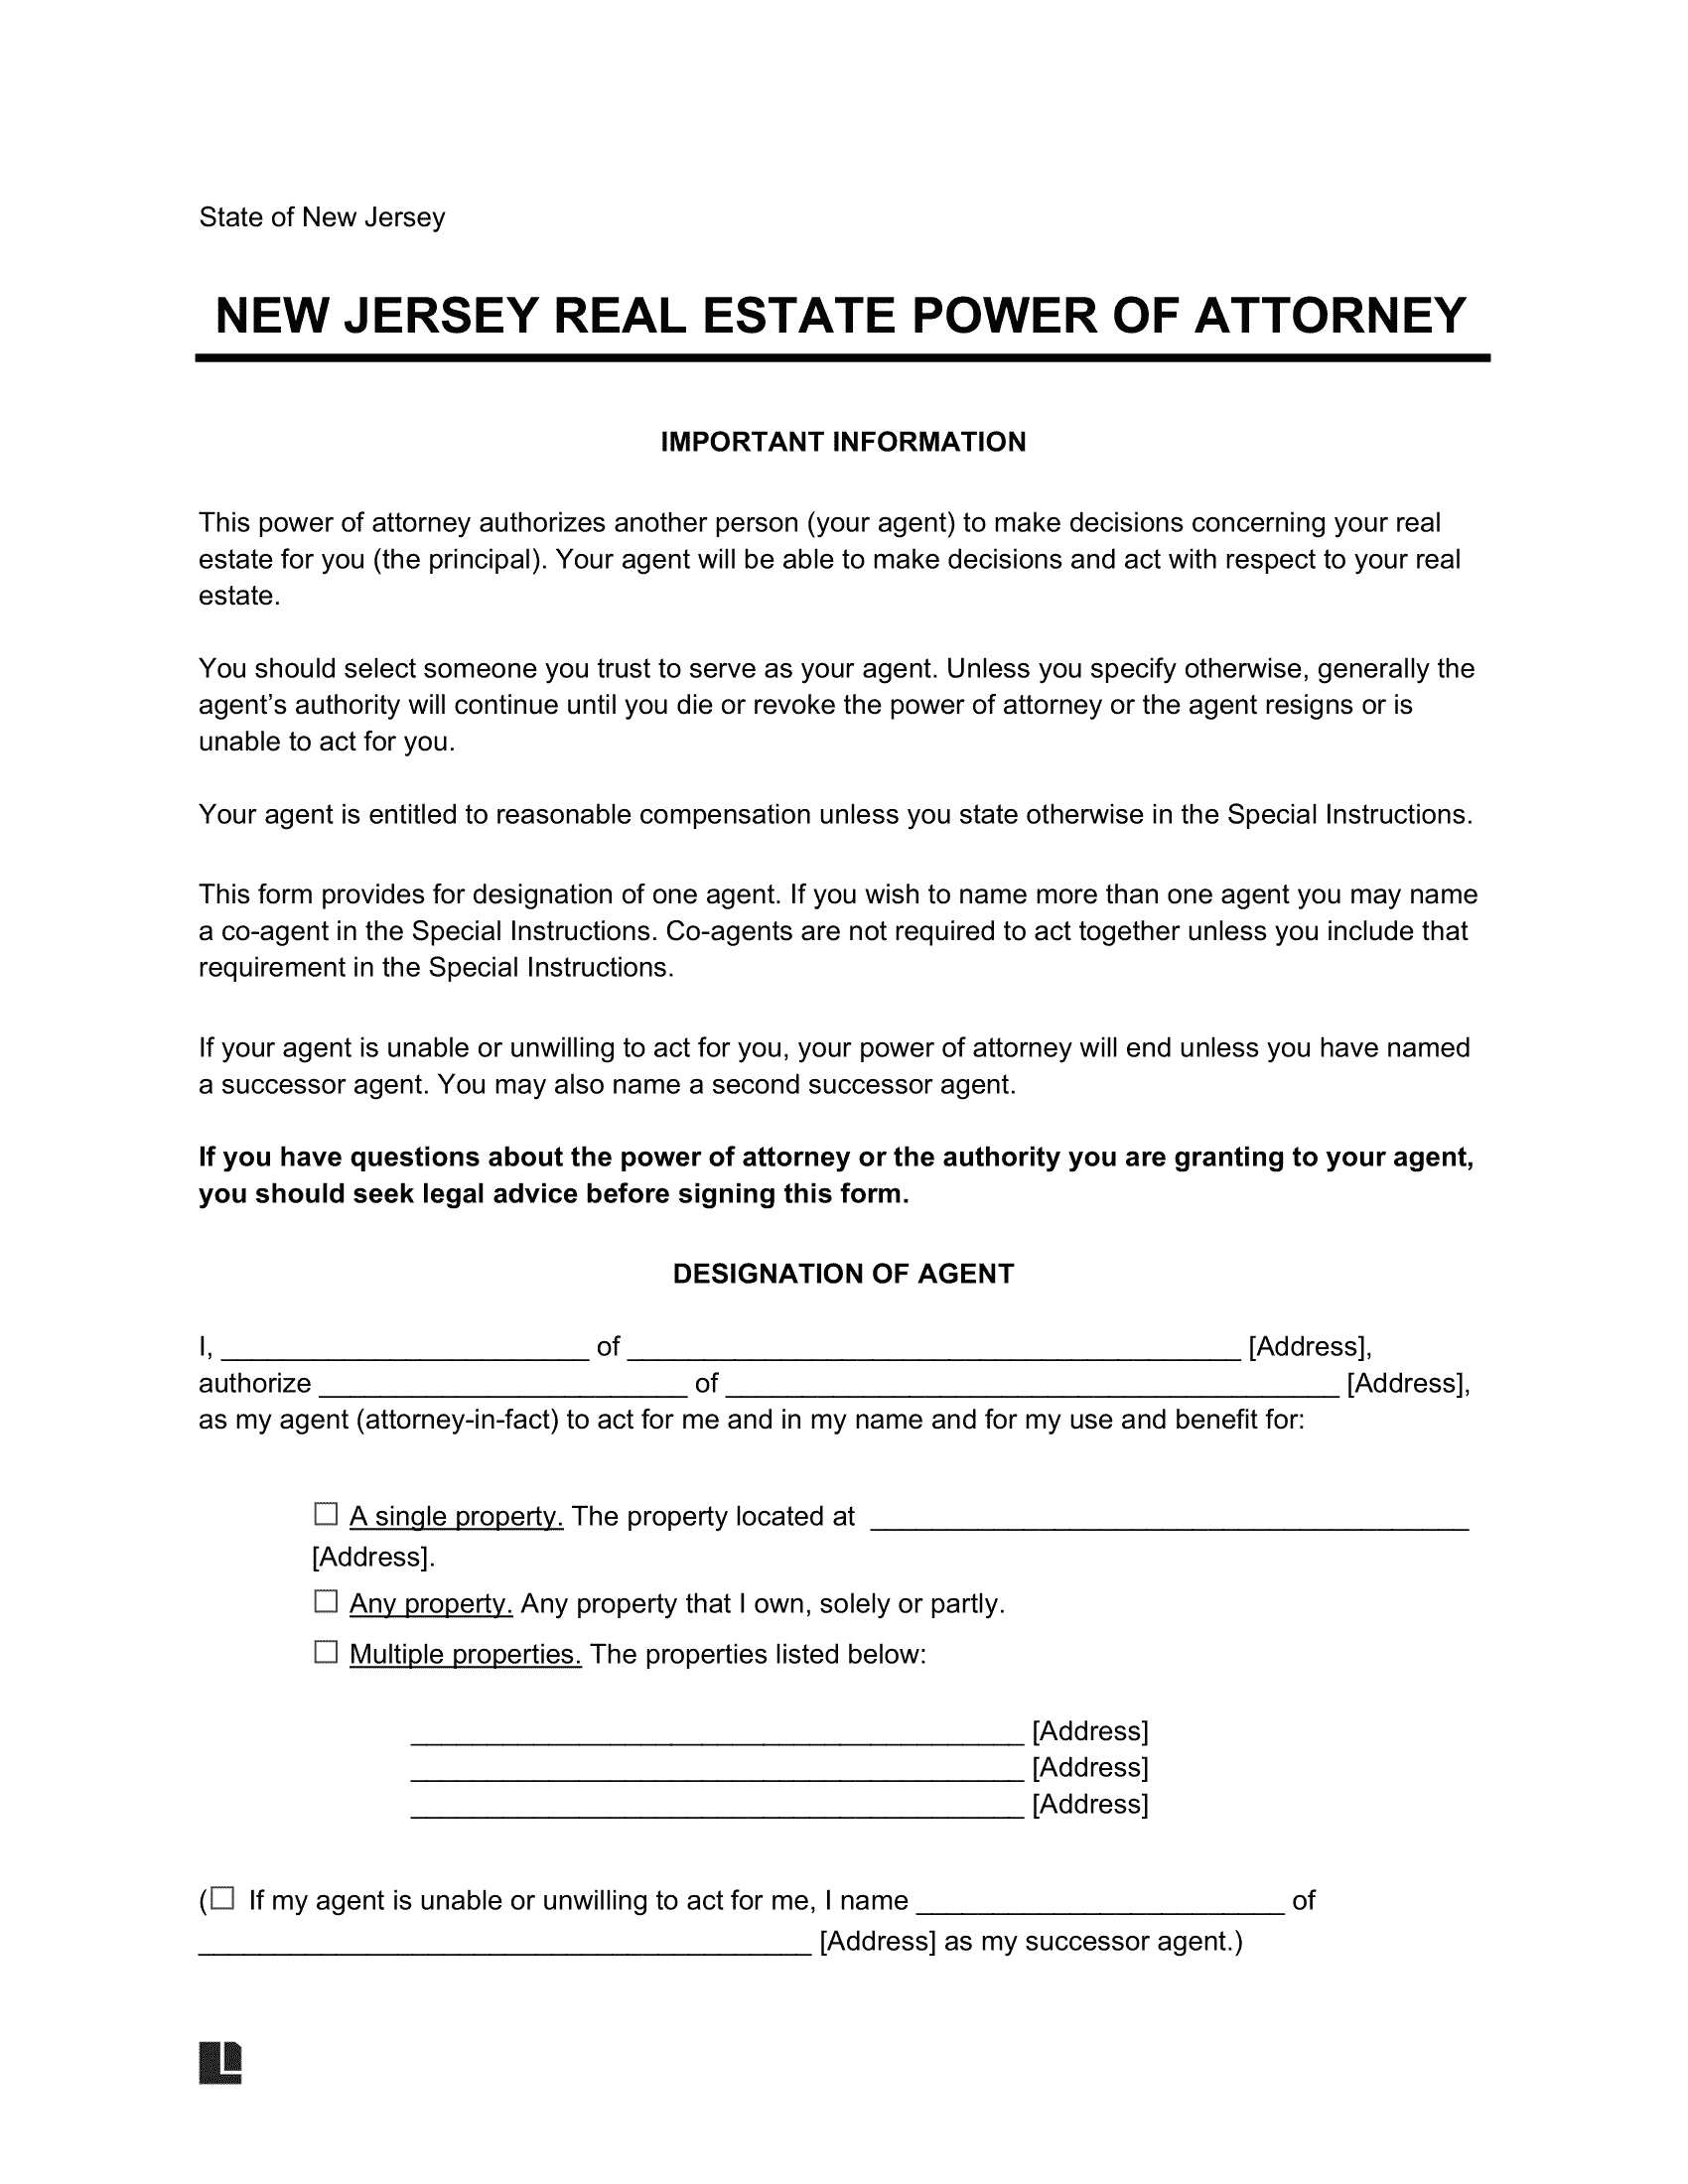 New Jersey Real Estate Power of Attorney Form